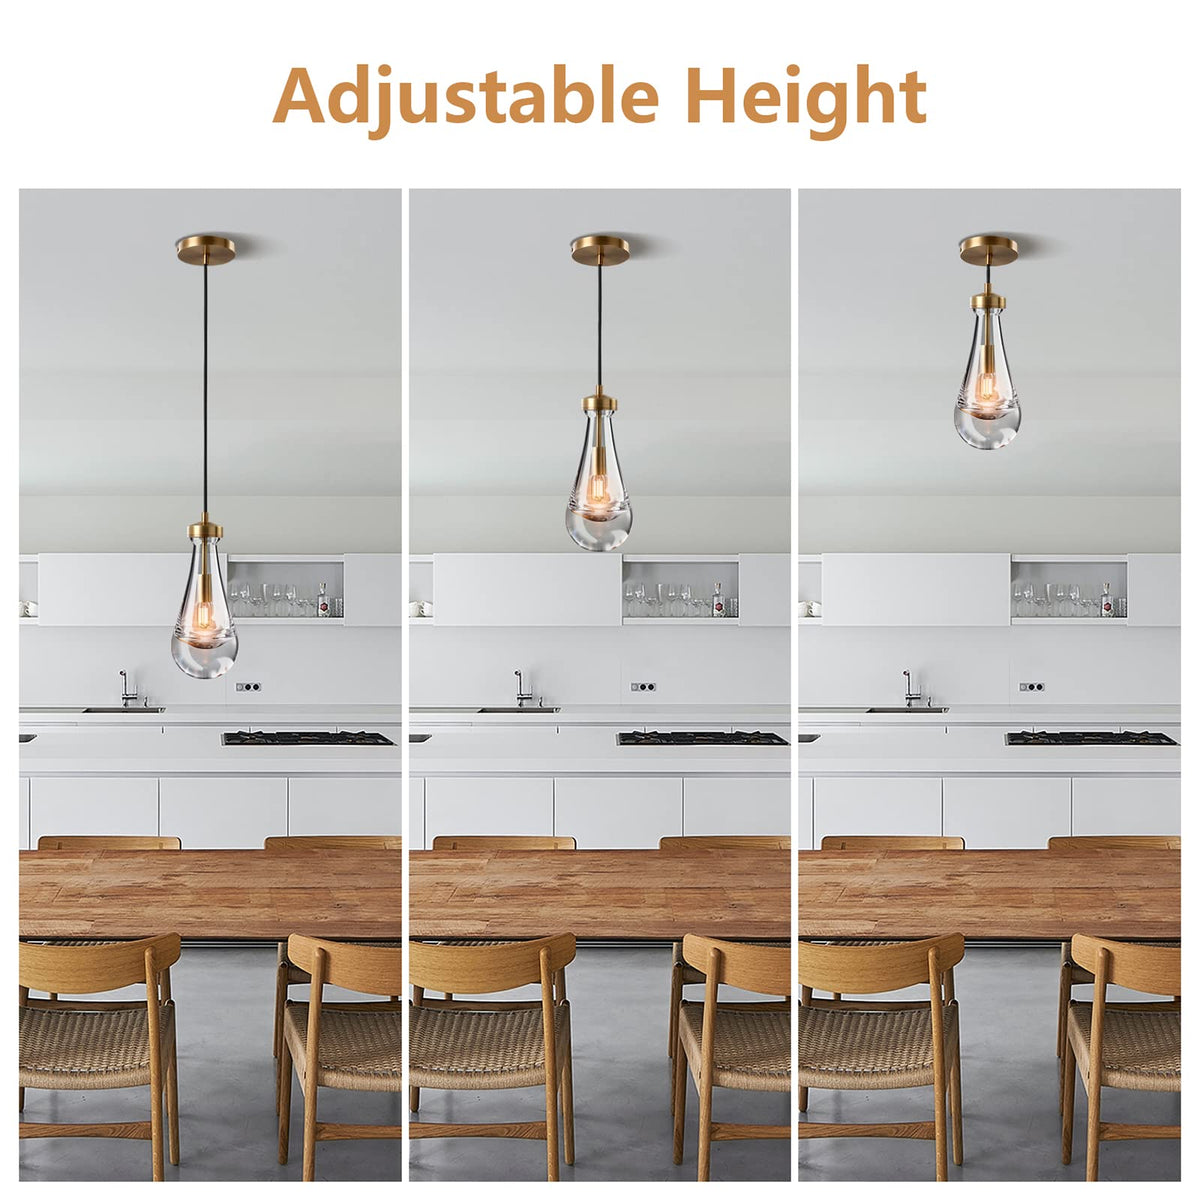 Modern Brass Pendant Light, Riandrop Hanging Light Fixtures, Pendant Lighting for Kitchen Island , Indoor Crystal Ceiling Light Fixtures with Clear Solid Crystal Raindrop for Living Room Hallway